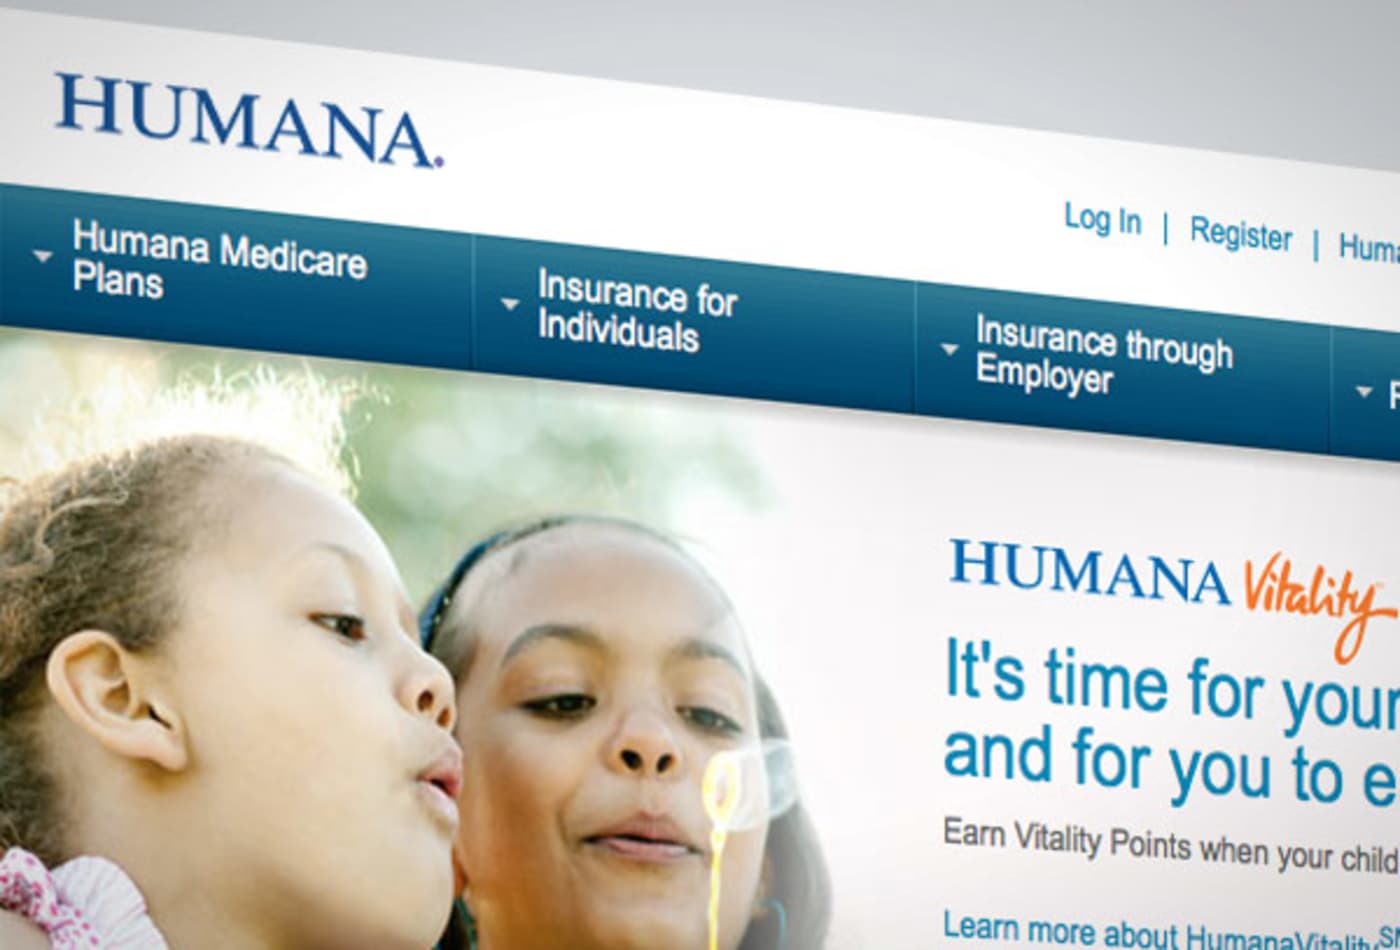 Humana turns to game theory for new Medicare price structure